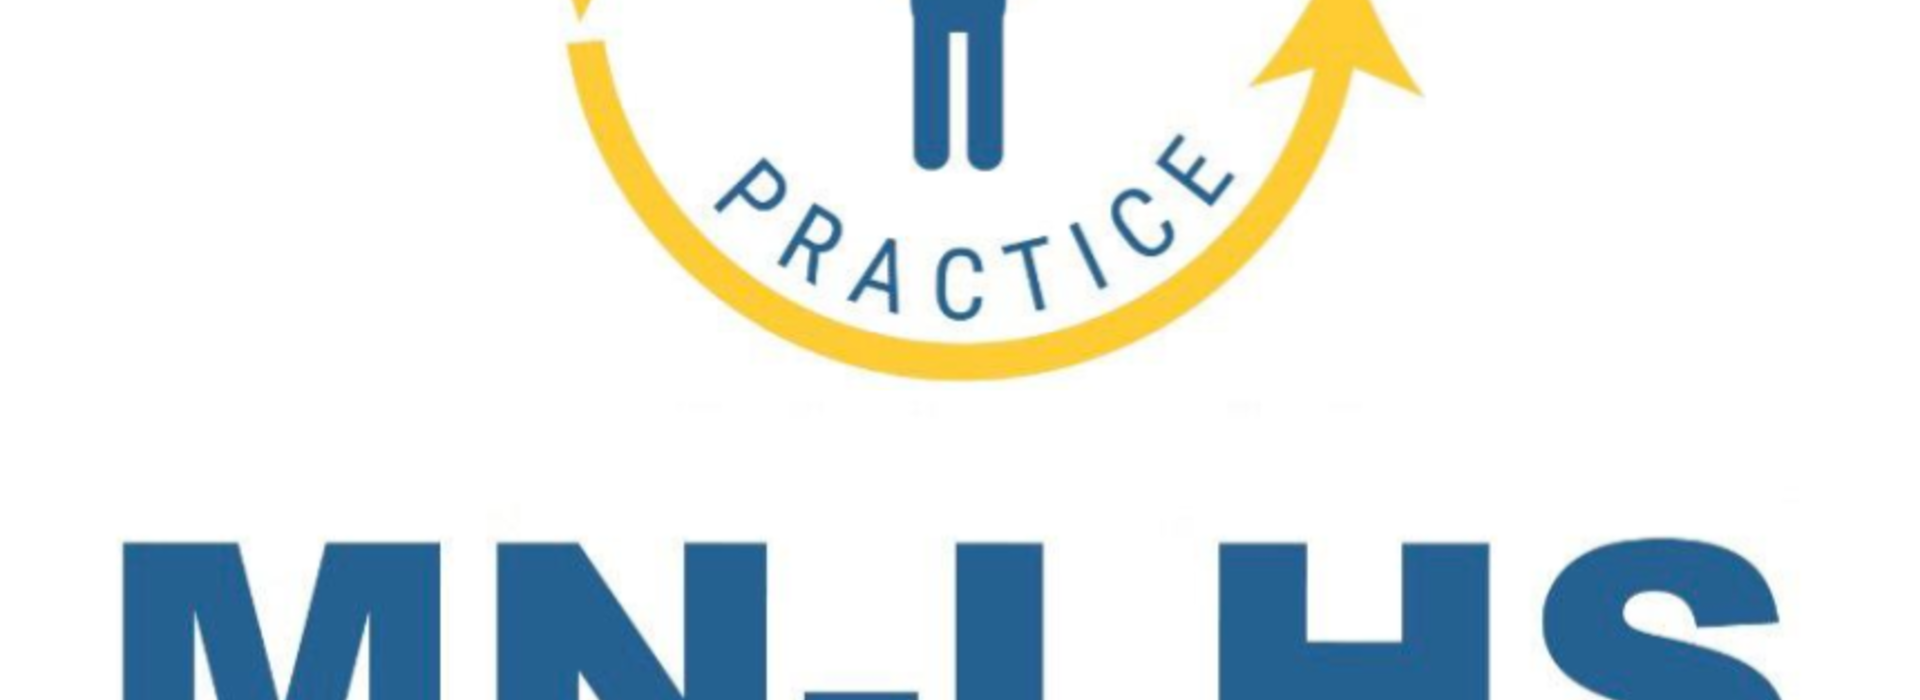 Logo of cycle between research and practice followed by text: MN-LHS, MN Learning Health System